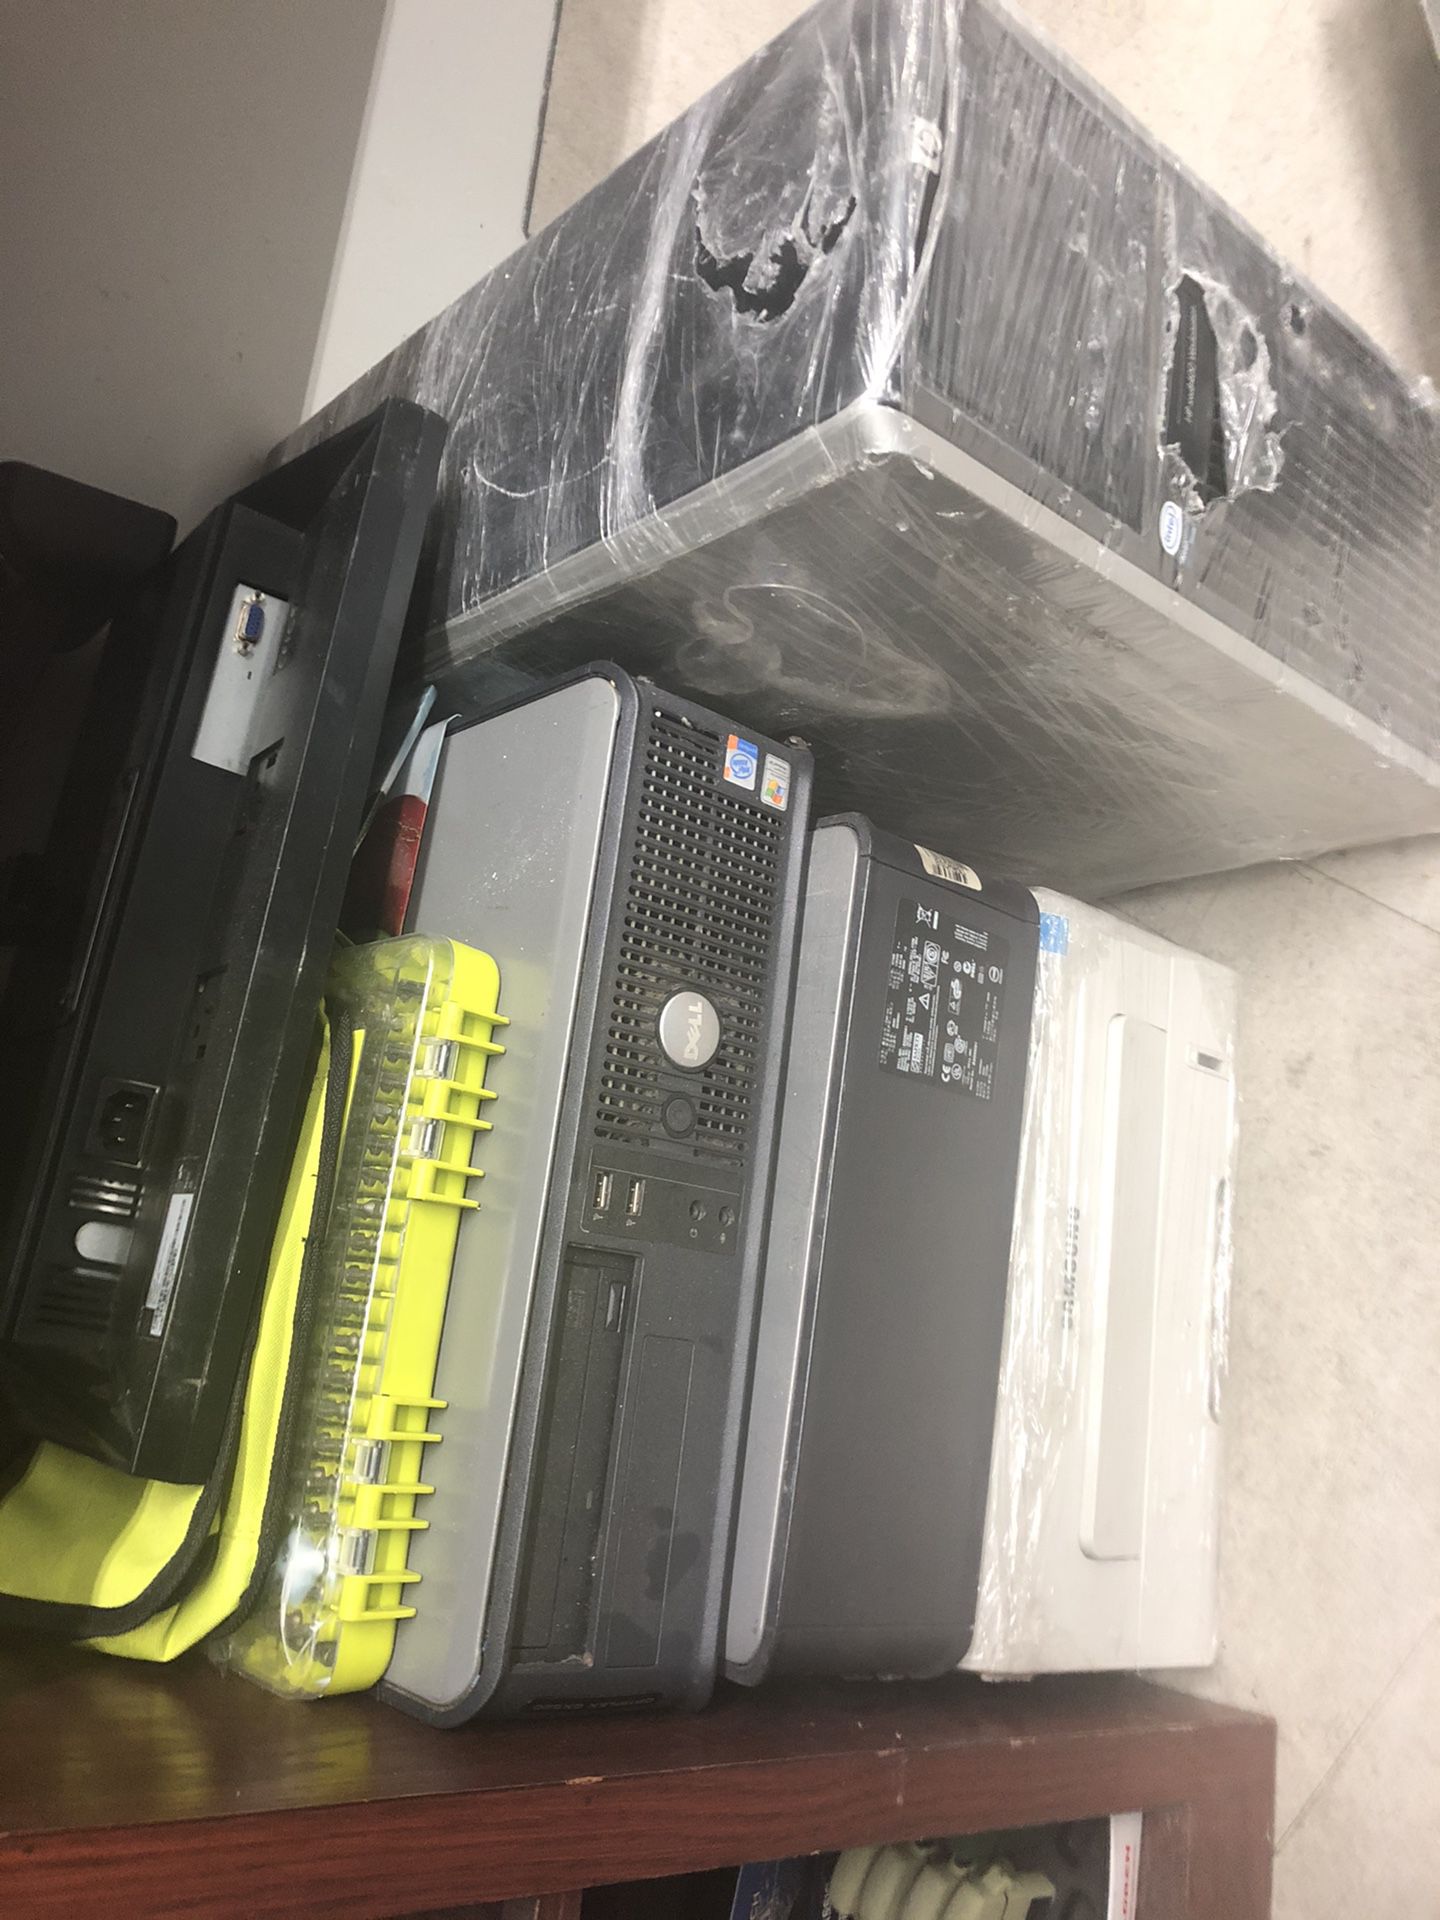 Dell computer and Printers